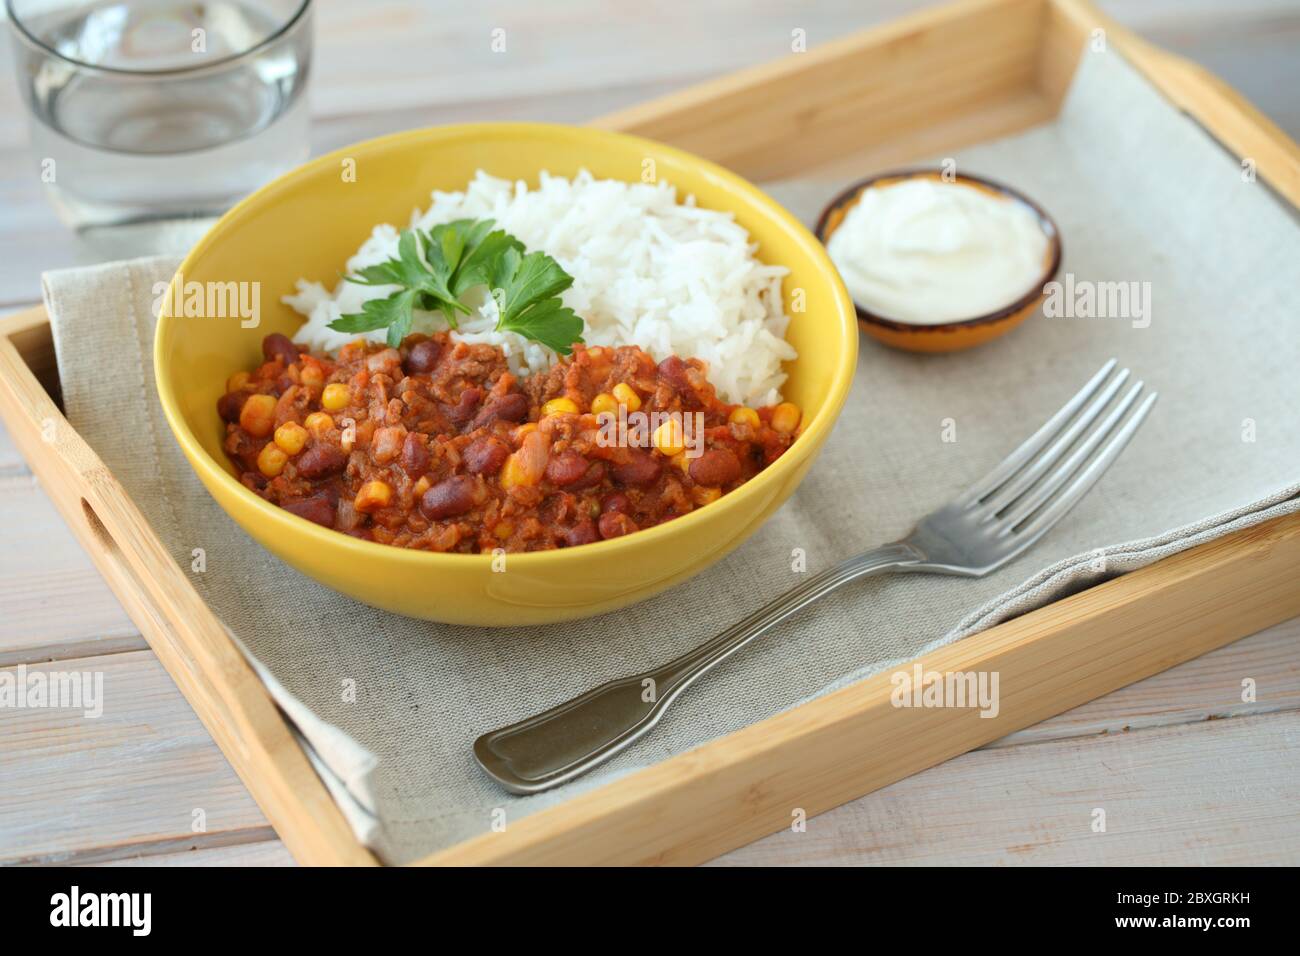 Chili con carne with long-grained rice decorated with a leaf of parsley and served with sour cream Stock Photo